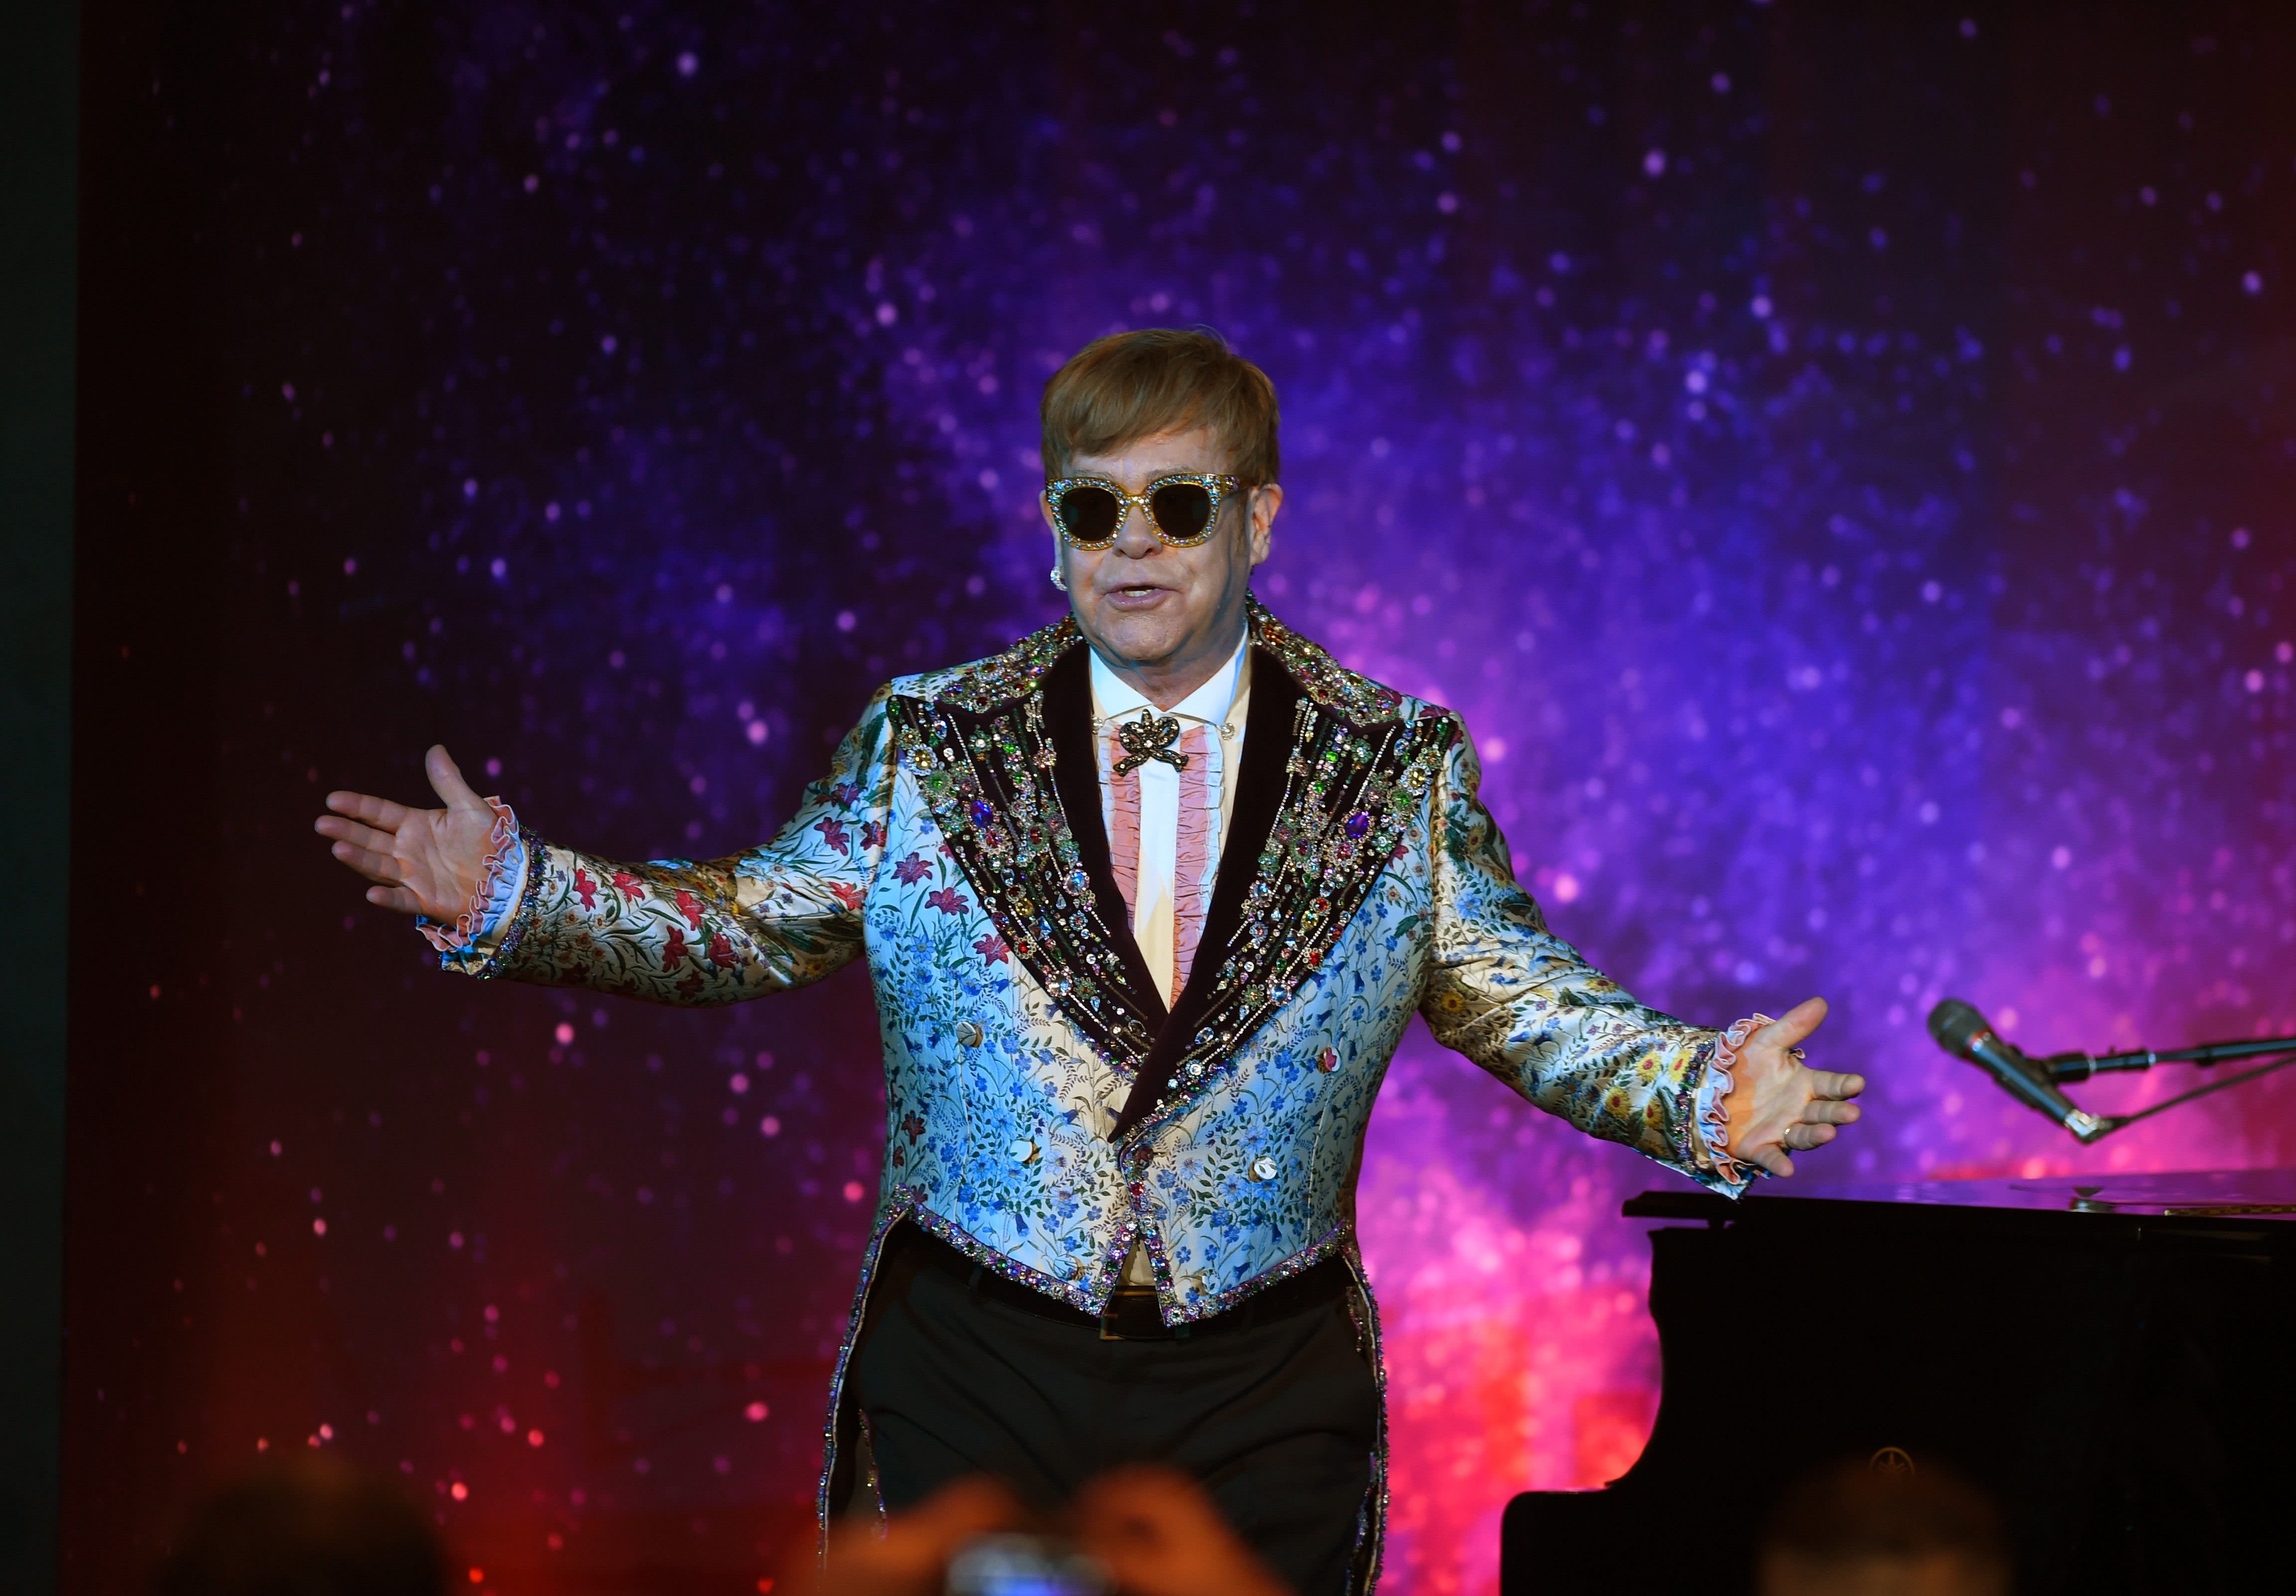 Review: Elton John offers listeners a post-pandemic treat – The Ithacan